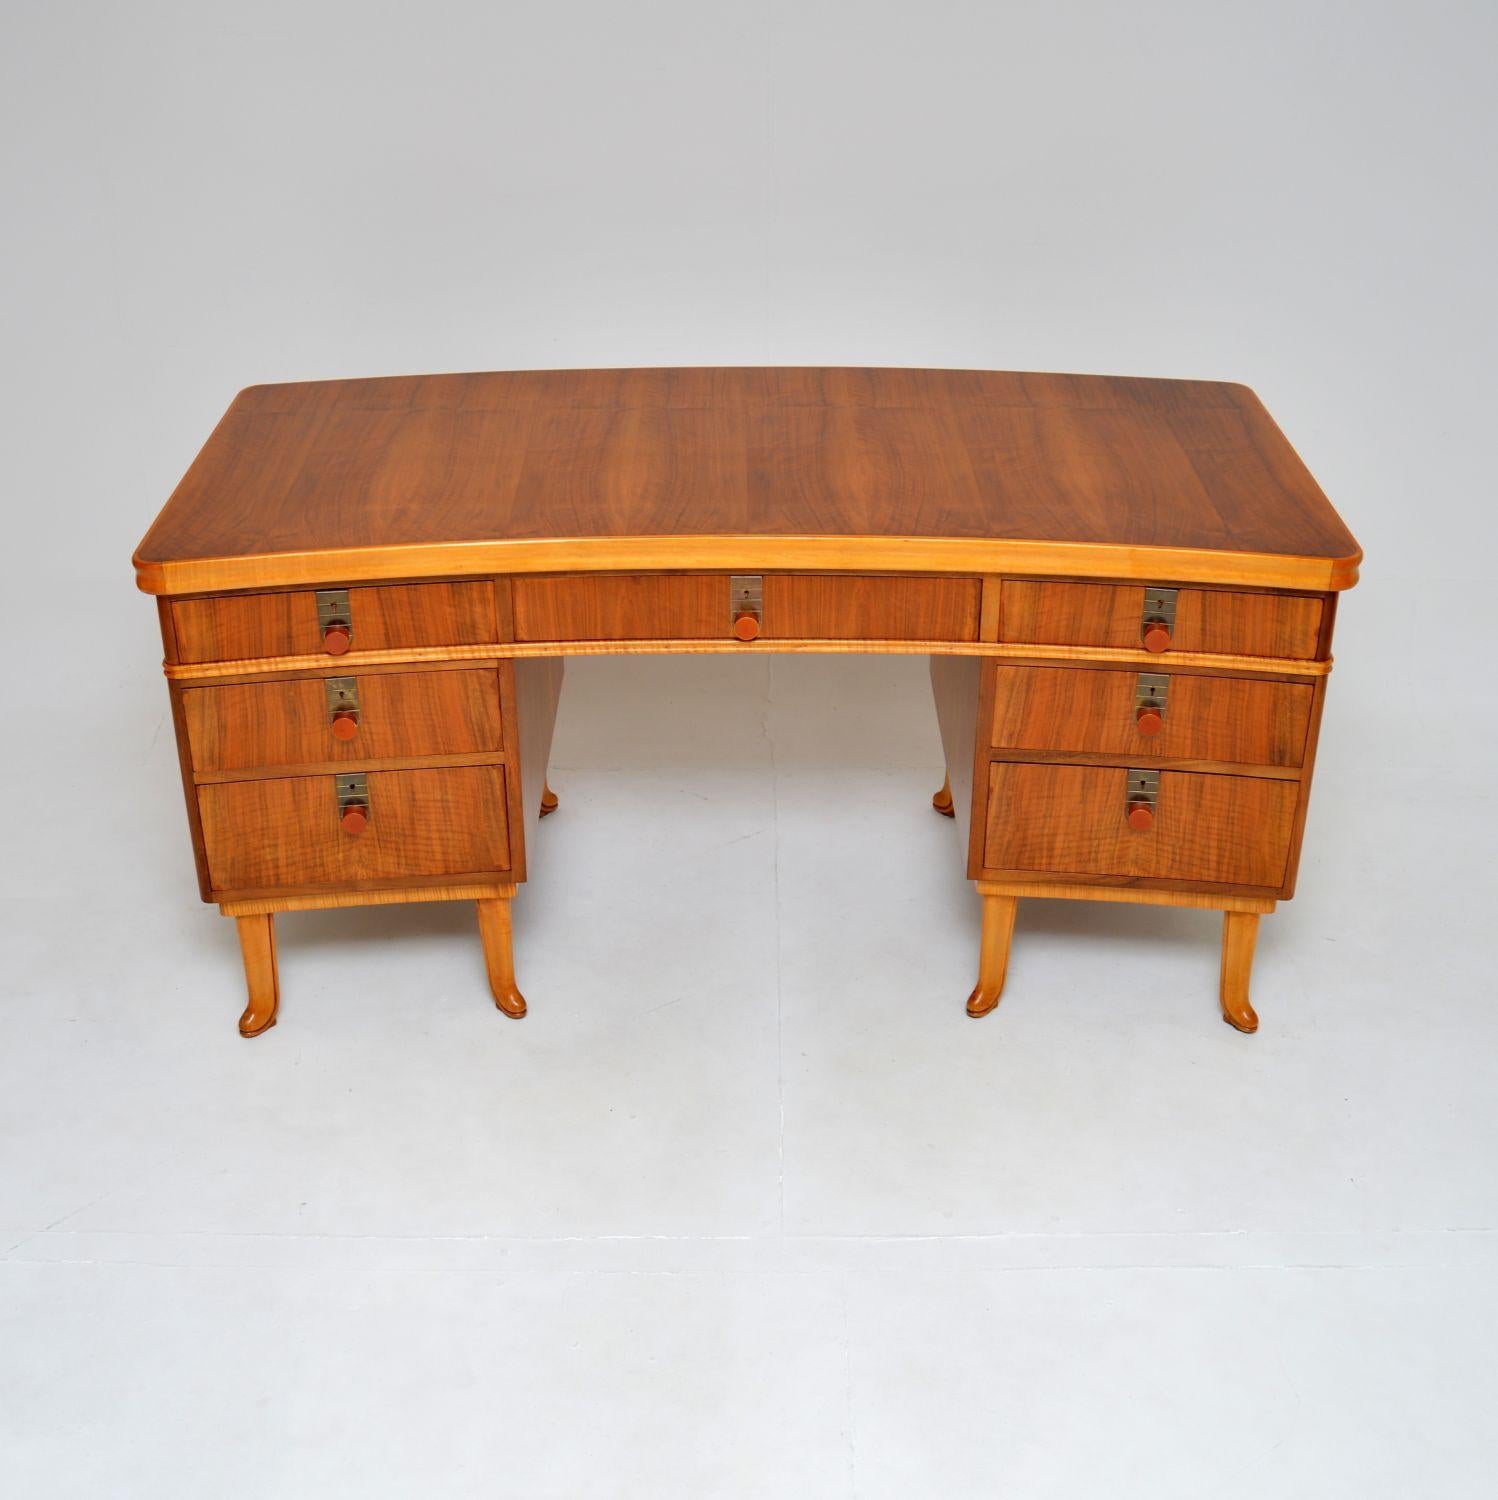 A spectacular vintage walnut pedestal desk by Laszlo Hoenig. This was made in London, there is a label beneath the top with the production year of 1951.

It is of outstanding quality, this is extremely well made and it has a gorgeous design. The top